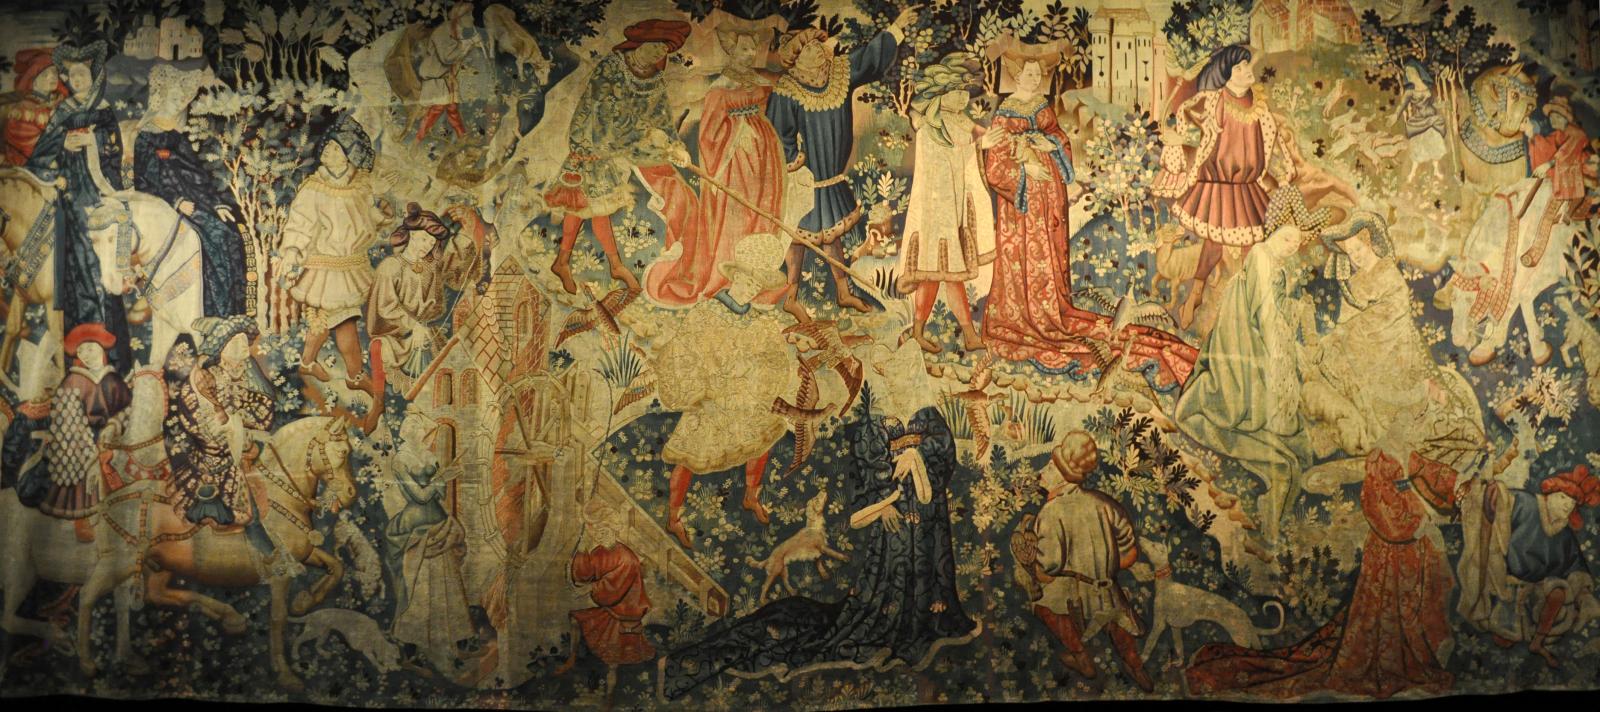  Falconry, The Devonshire Hunting Tapestries, late 1420s